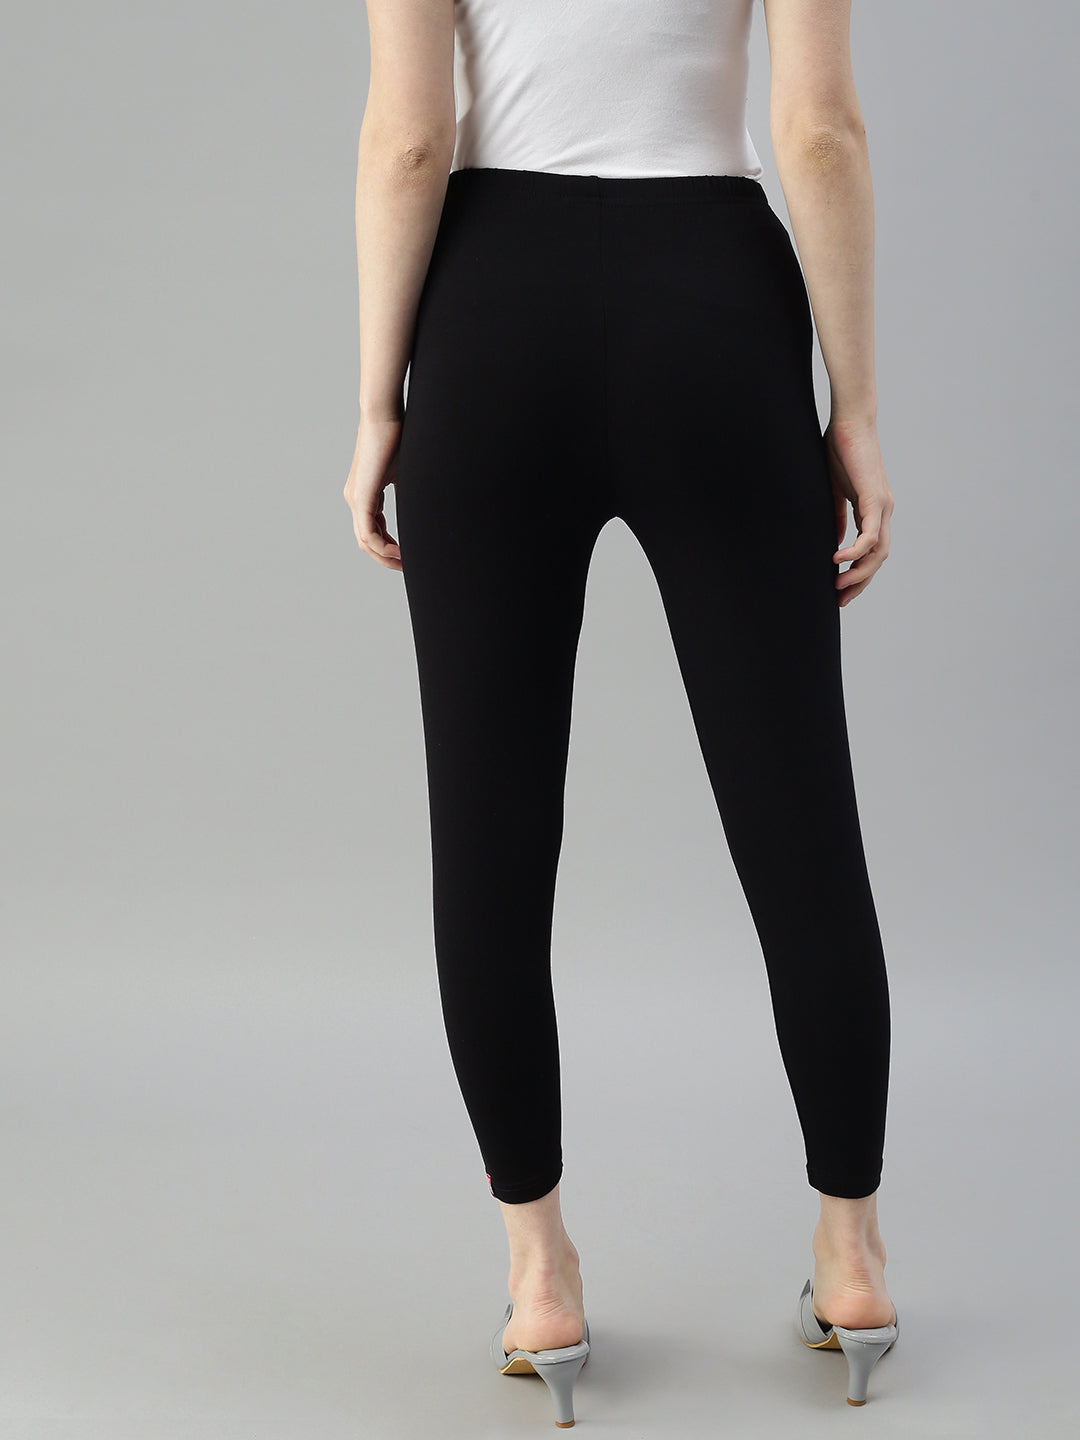 Prisma Shimmer Leggings in Gold - Add Sparkle to Your Outfit